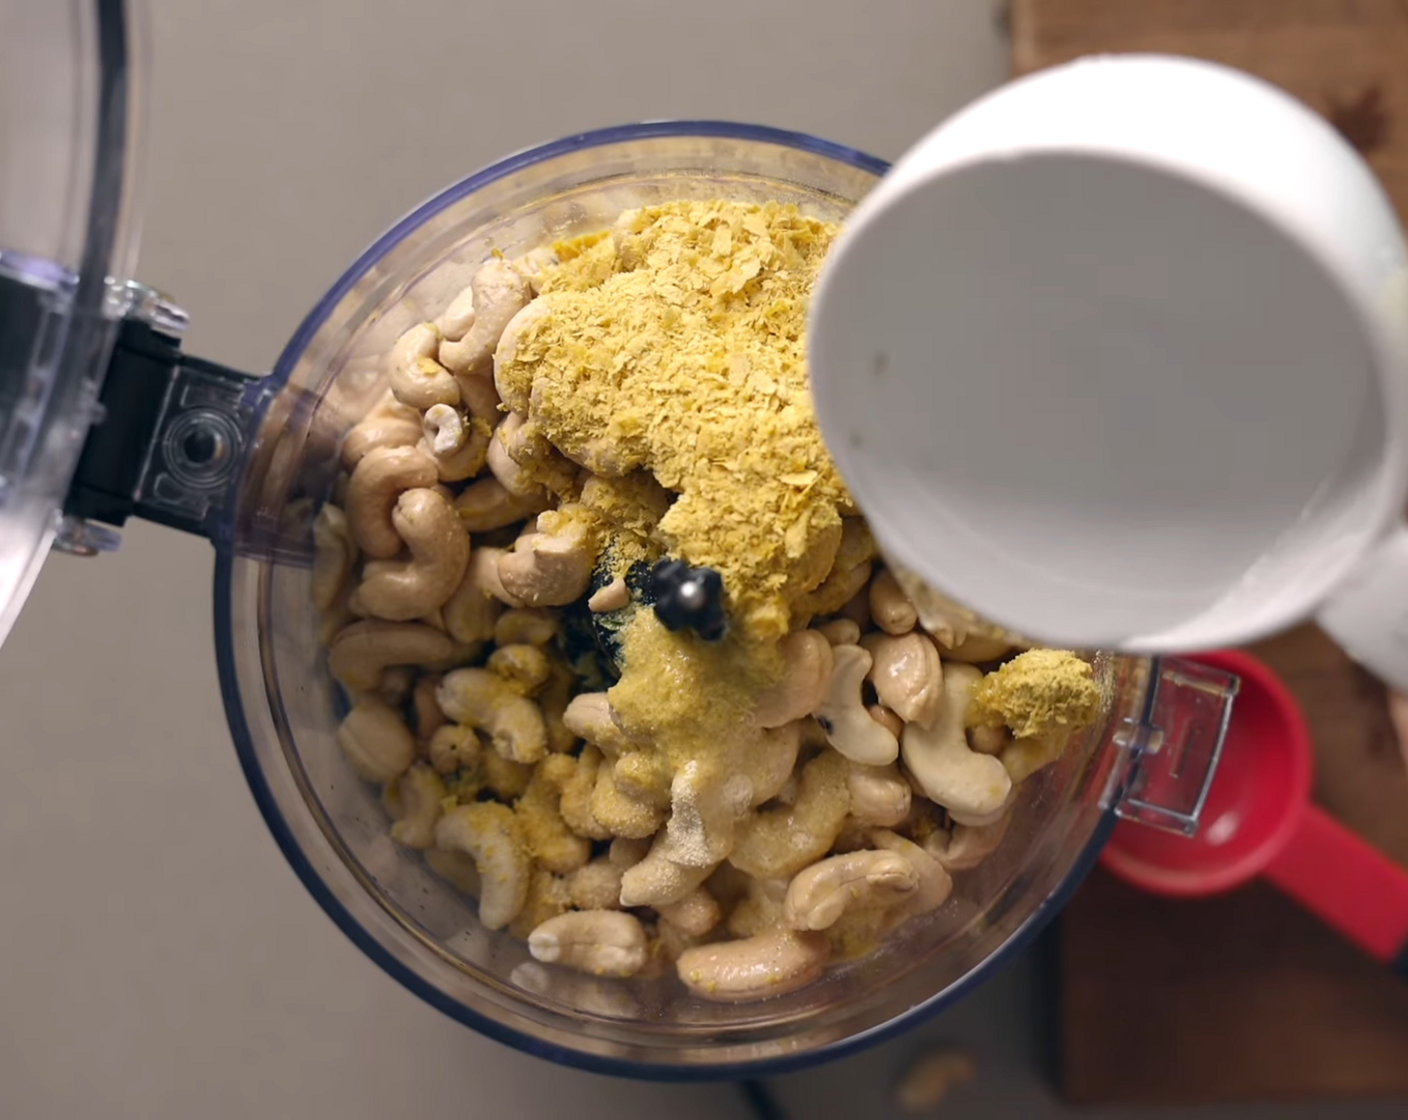 step 2 Discard soaking water from Raw Cashews (3 cups) and add to a high power food processor or blender together with 3 Tbsp of Lemons (2), Nutritional Yeast (1/4 cup), McCormick® Garlic Powder (1 Tbsp), Fine Sea Salt (1/2 tsp), and Water (1 cup). Blend until creamy. Set aside.